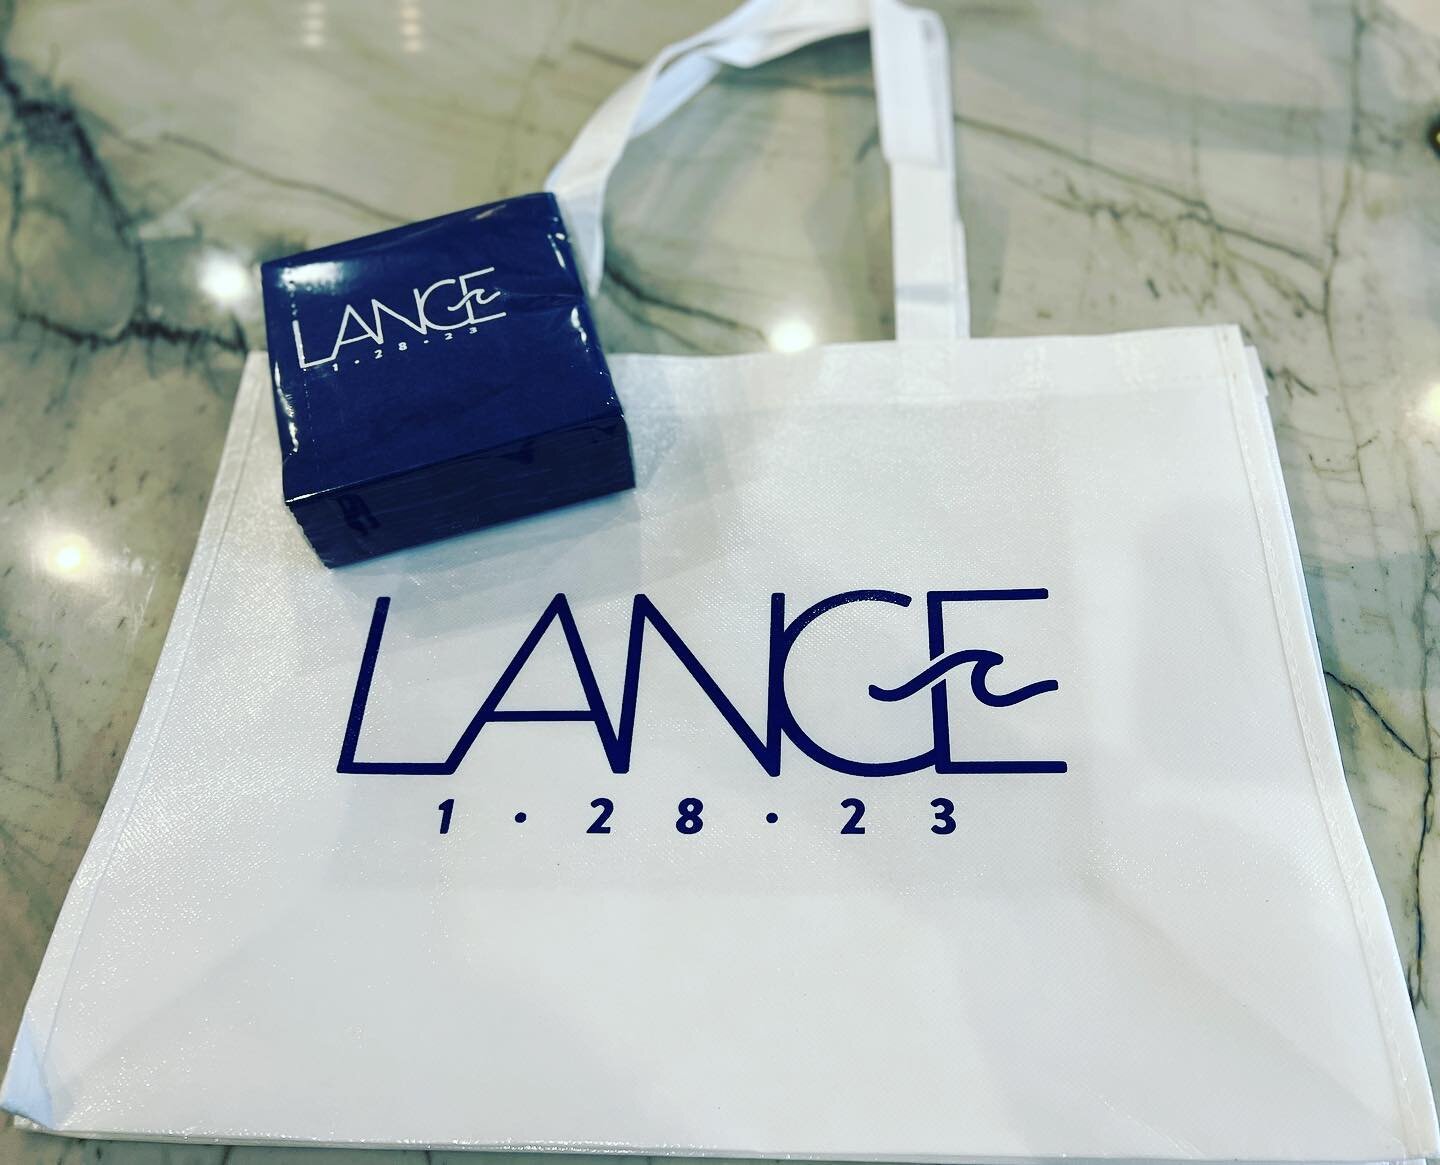 It&rsquo;s all in the detaills for Lange&rsquo;s Bat Mitzvah 🌊
:: &bull; :: 
@jbarthouse designs
#swag #swagbag #laminated #glossy #totebag #cocktails #napkins #navyandwhite #decor #logo #eventplanning #details @corbin_style